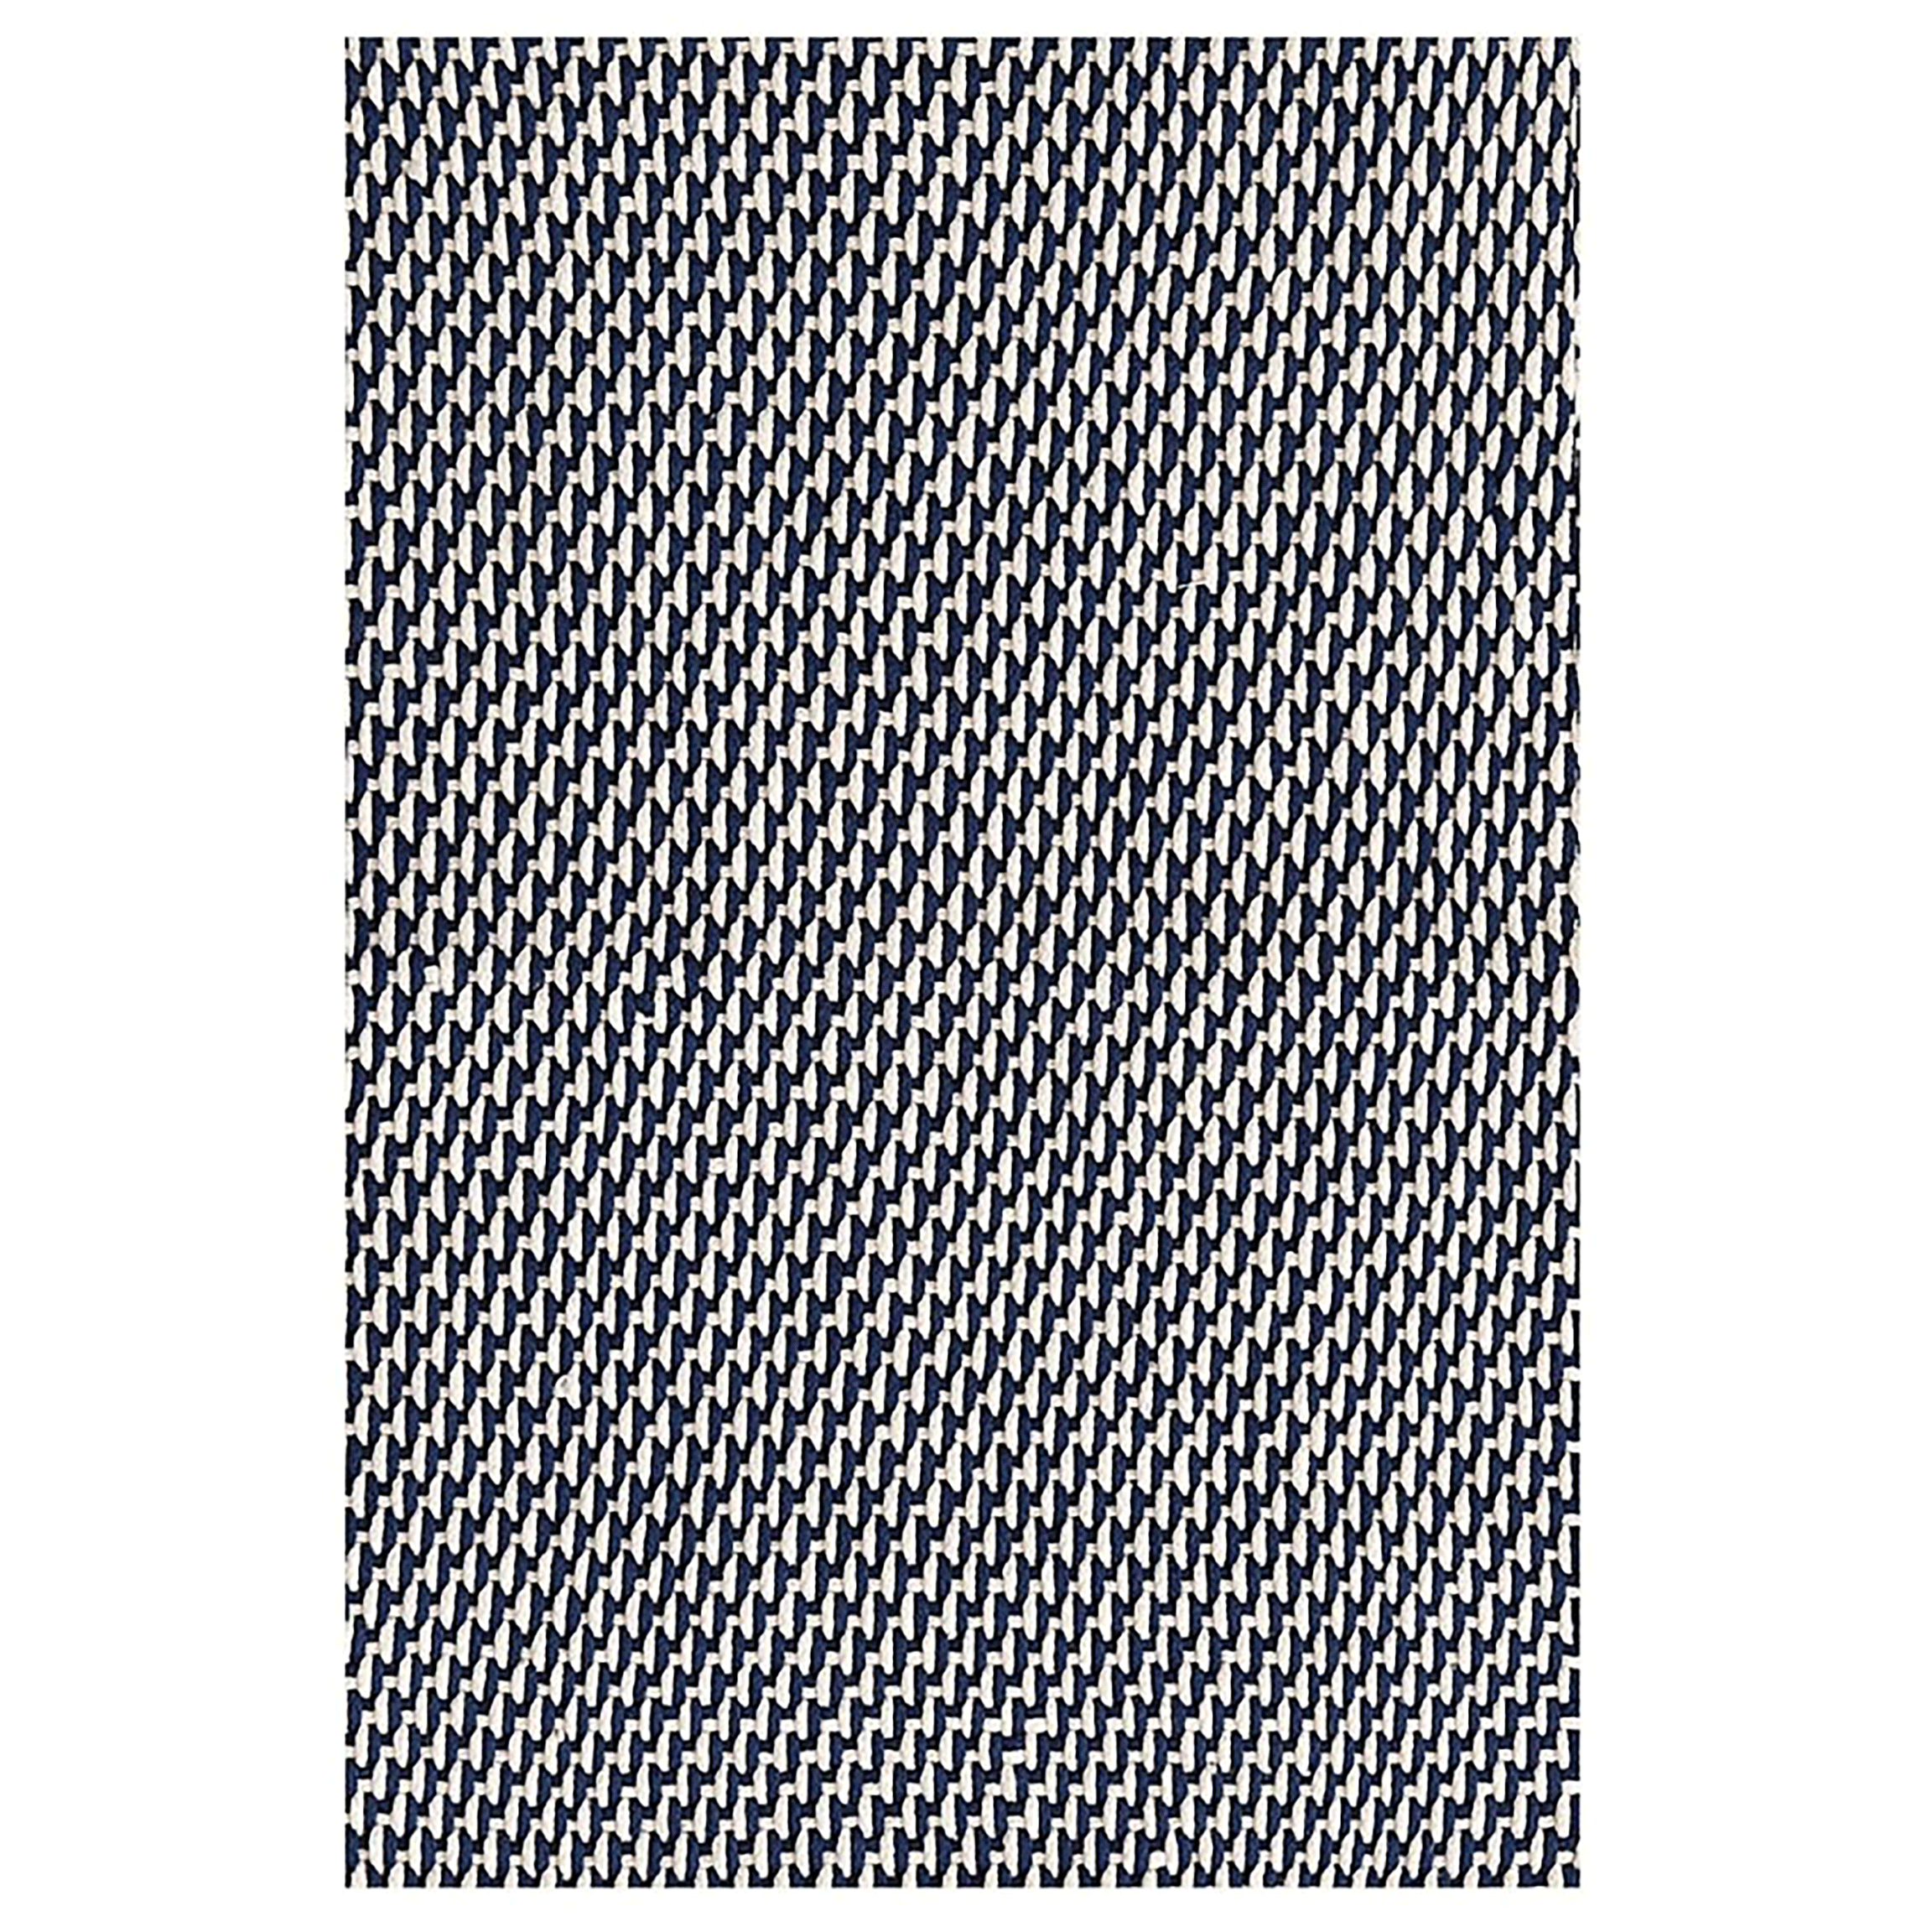 https://cdn.shopify.com/s/files/1/0275/0060/9641/products/two-tone-rope-navy-ivory-indoor-outdoor-rug.gif?v=1653693971&width=2304